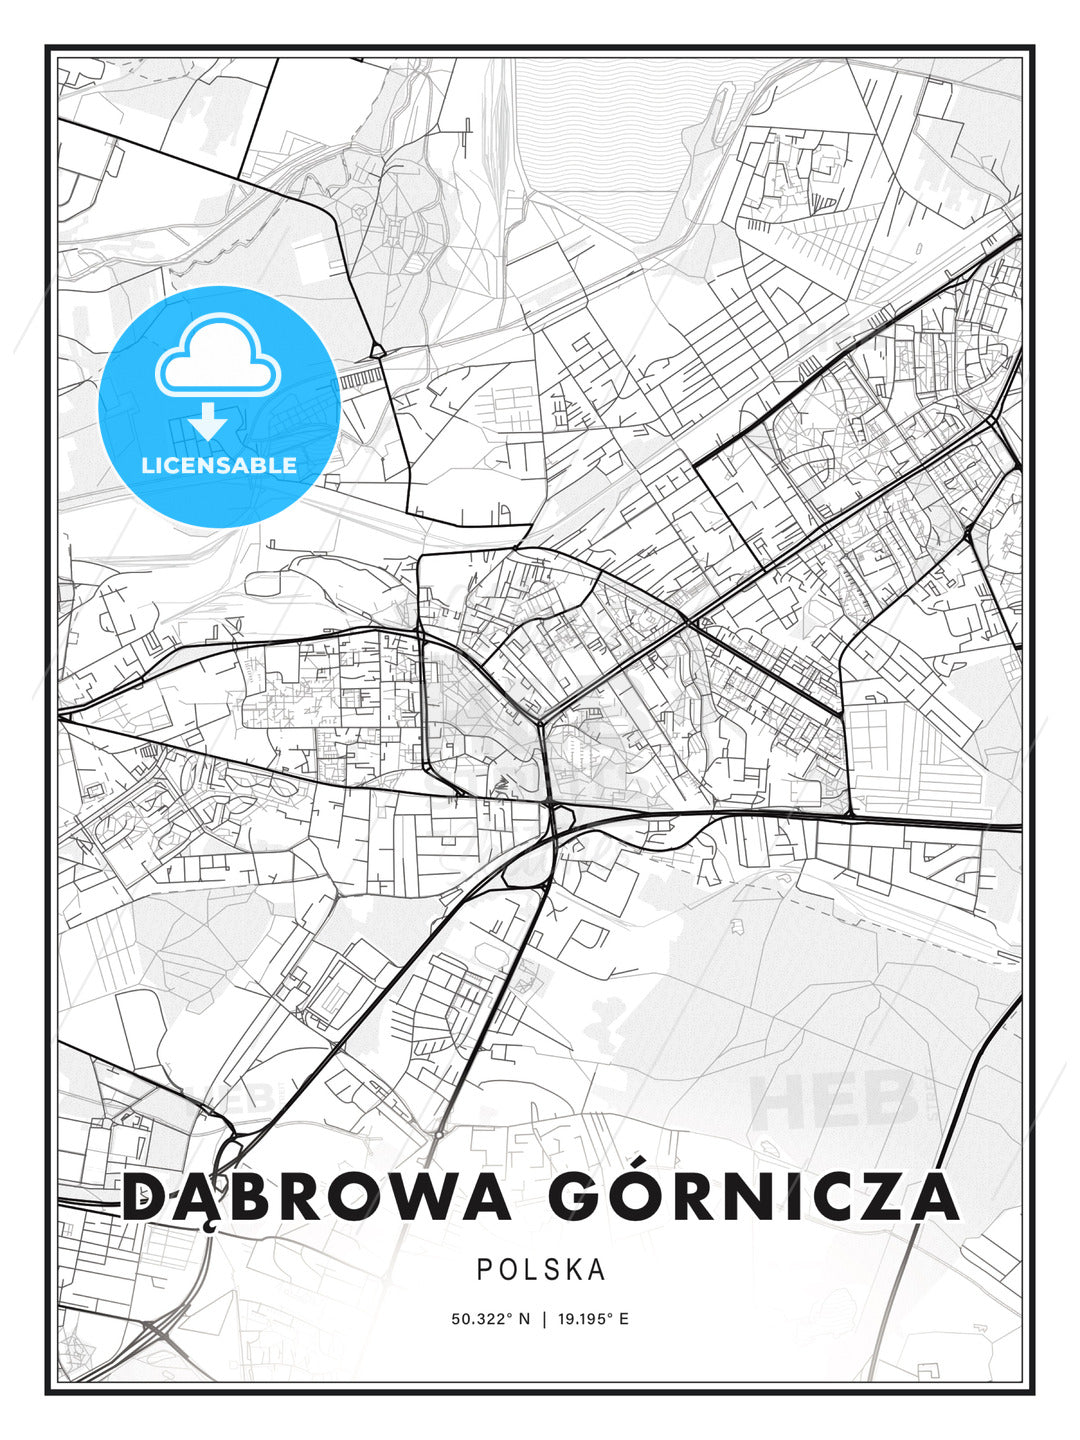 Dąbrowa Górnicza, Poland, Modern Print Template in Various Formats - HEBSTREITS Sketches